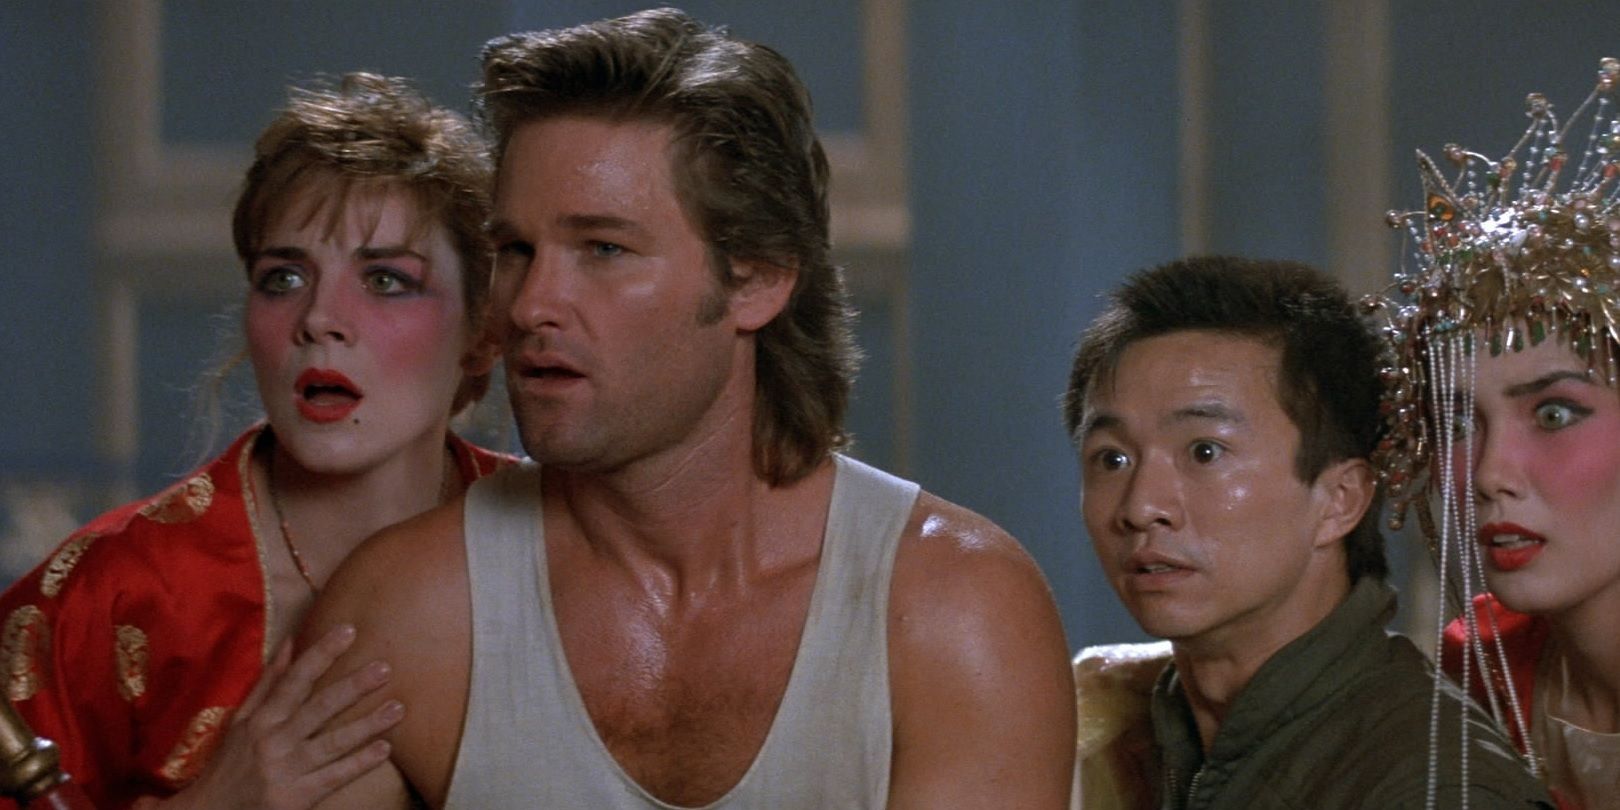 Kurt Russell as Jack Burton in Big Trouble in Little China